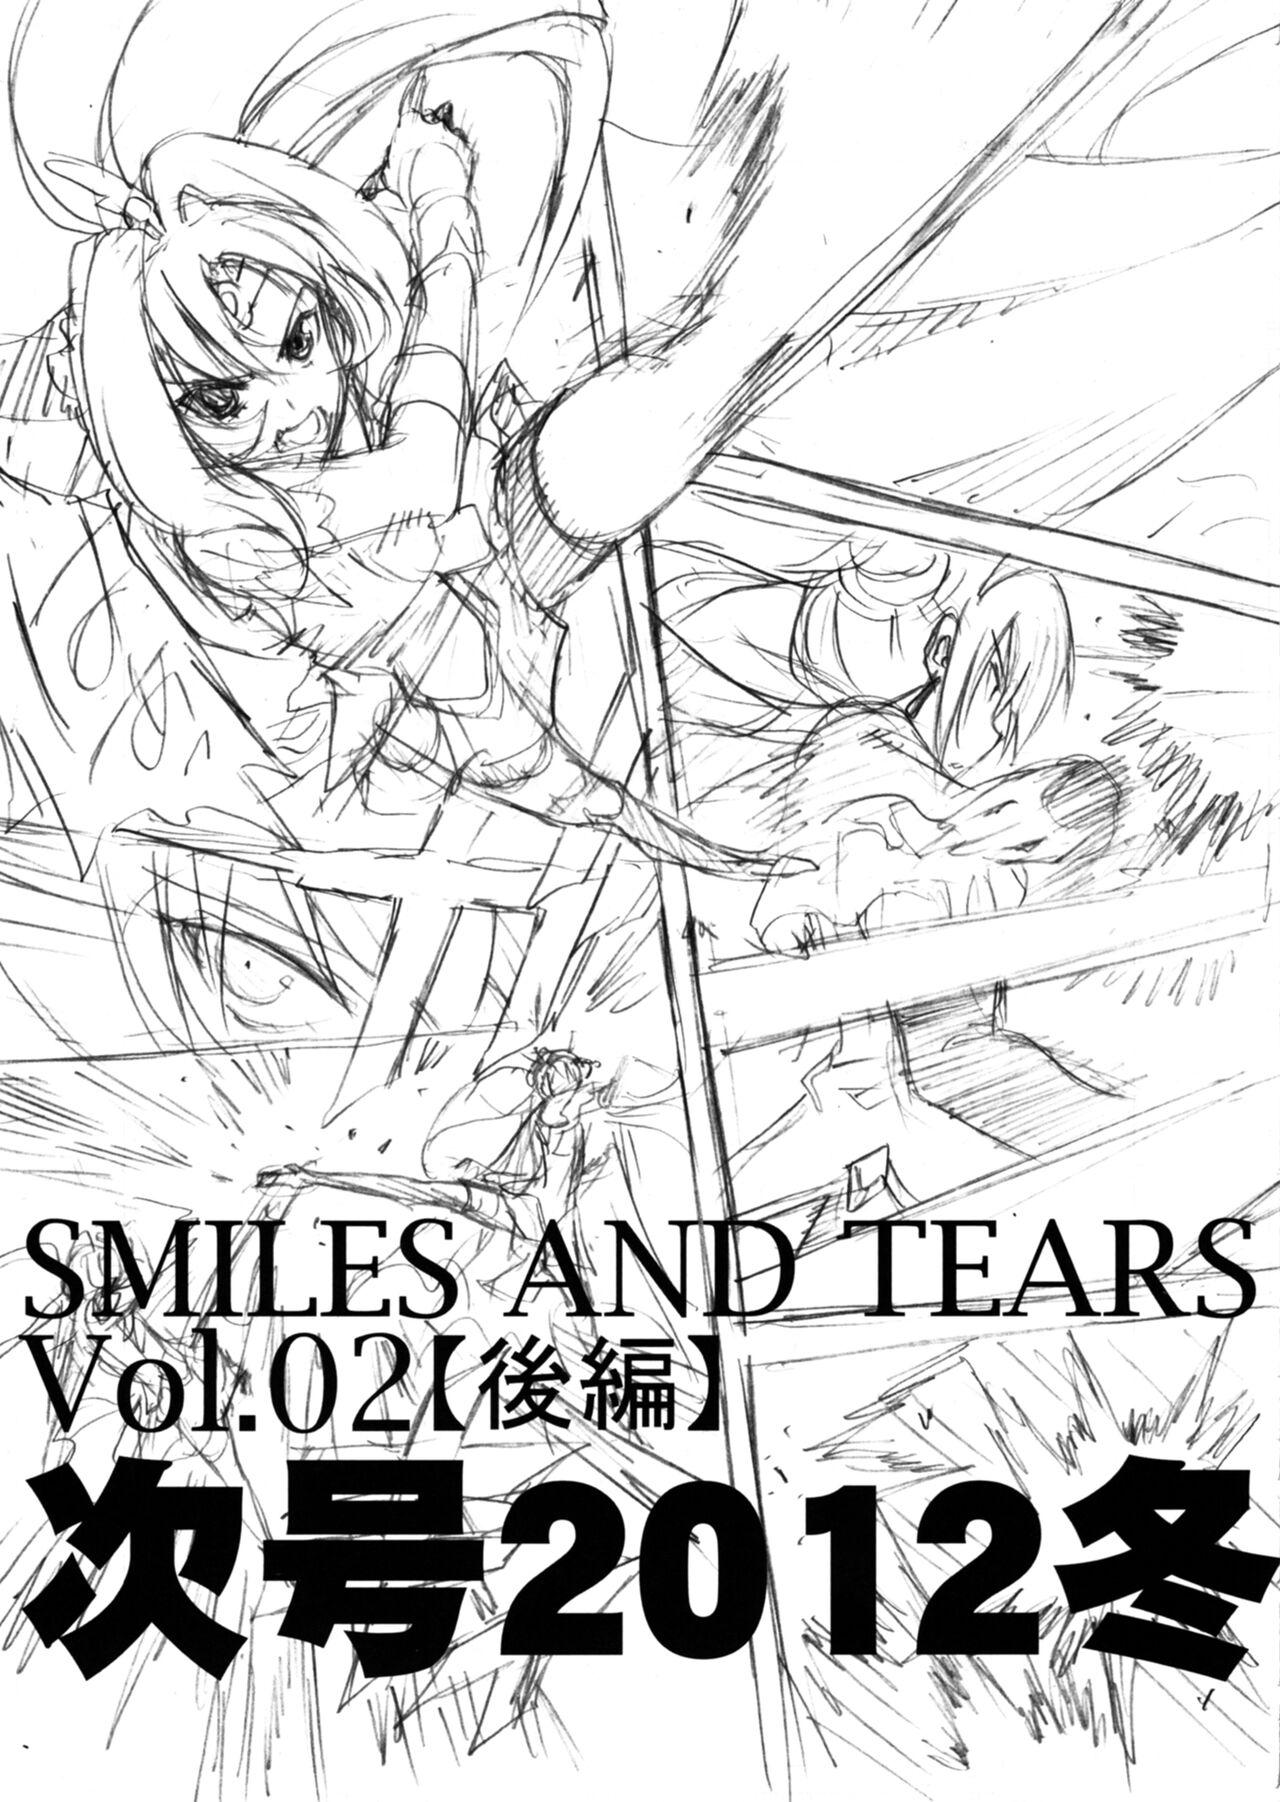 SMILES AND TEARS Vol. 01 31